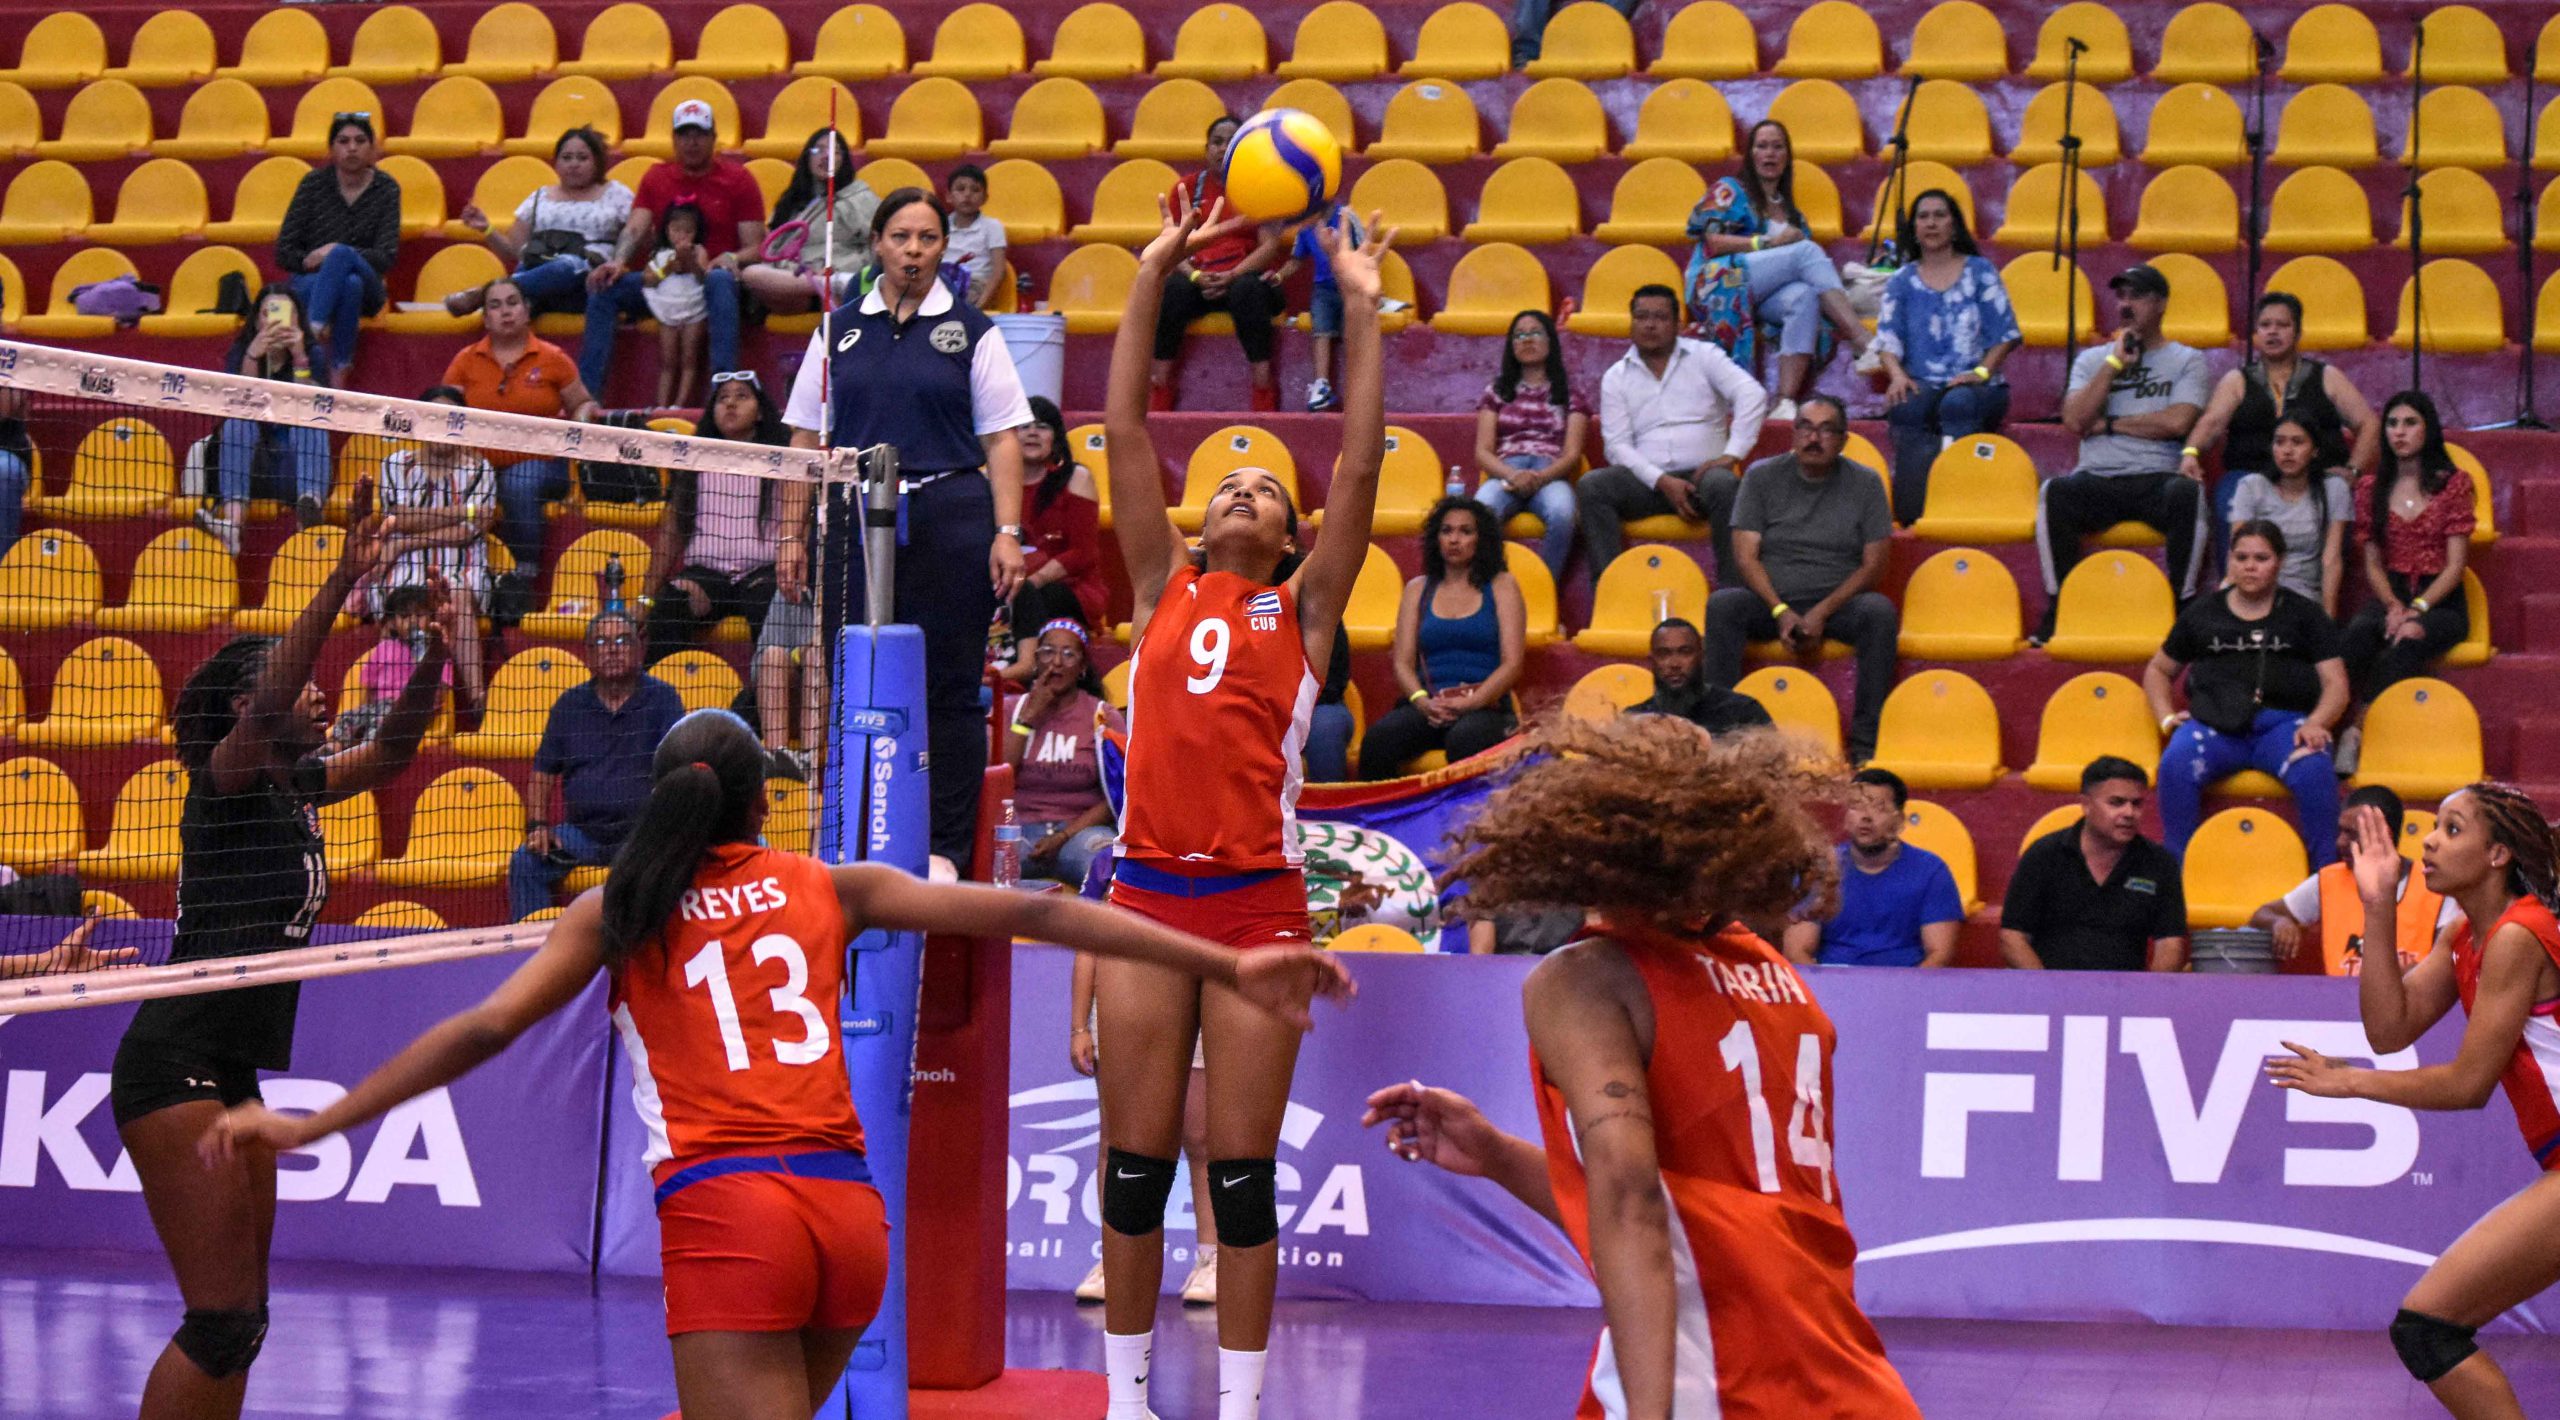 Cuba starts U21 Pan Am Cup defeating Belize in straight sets